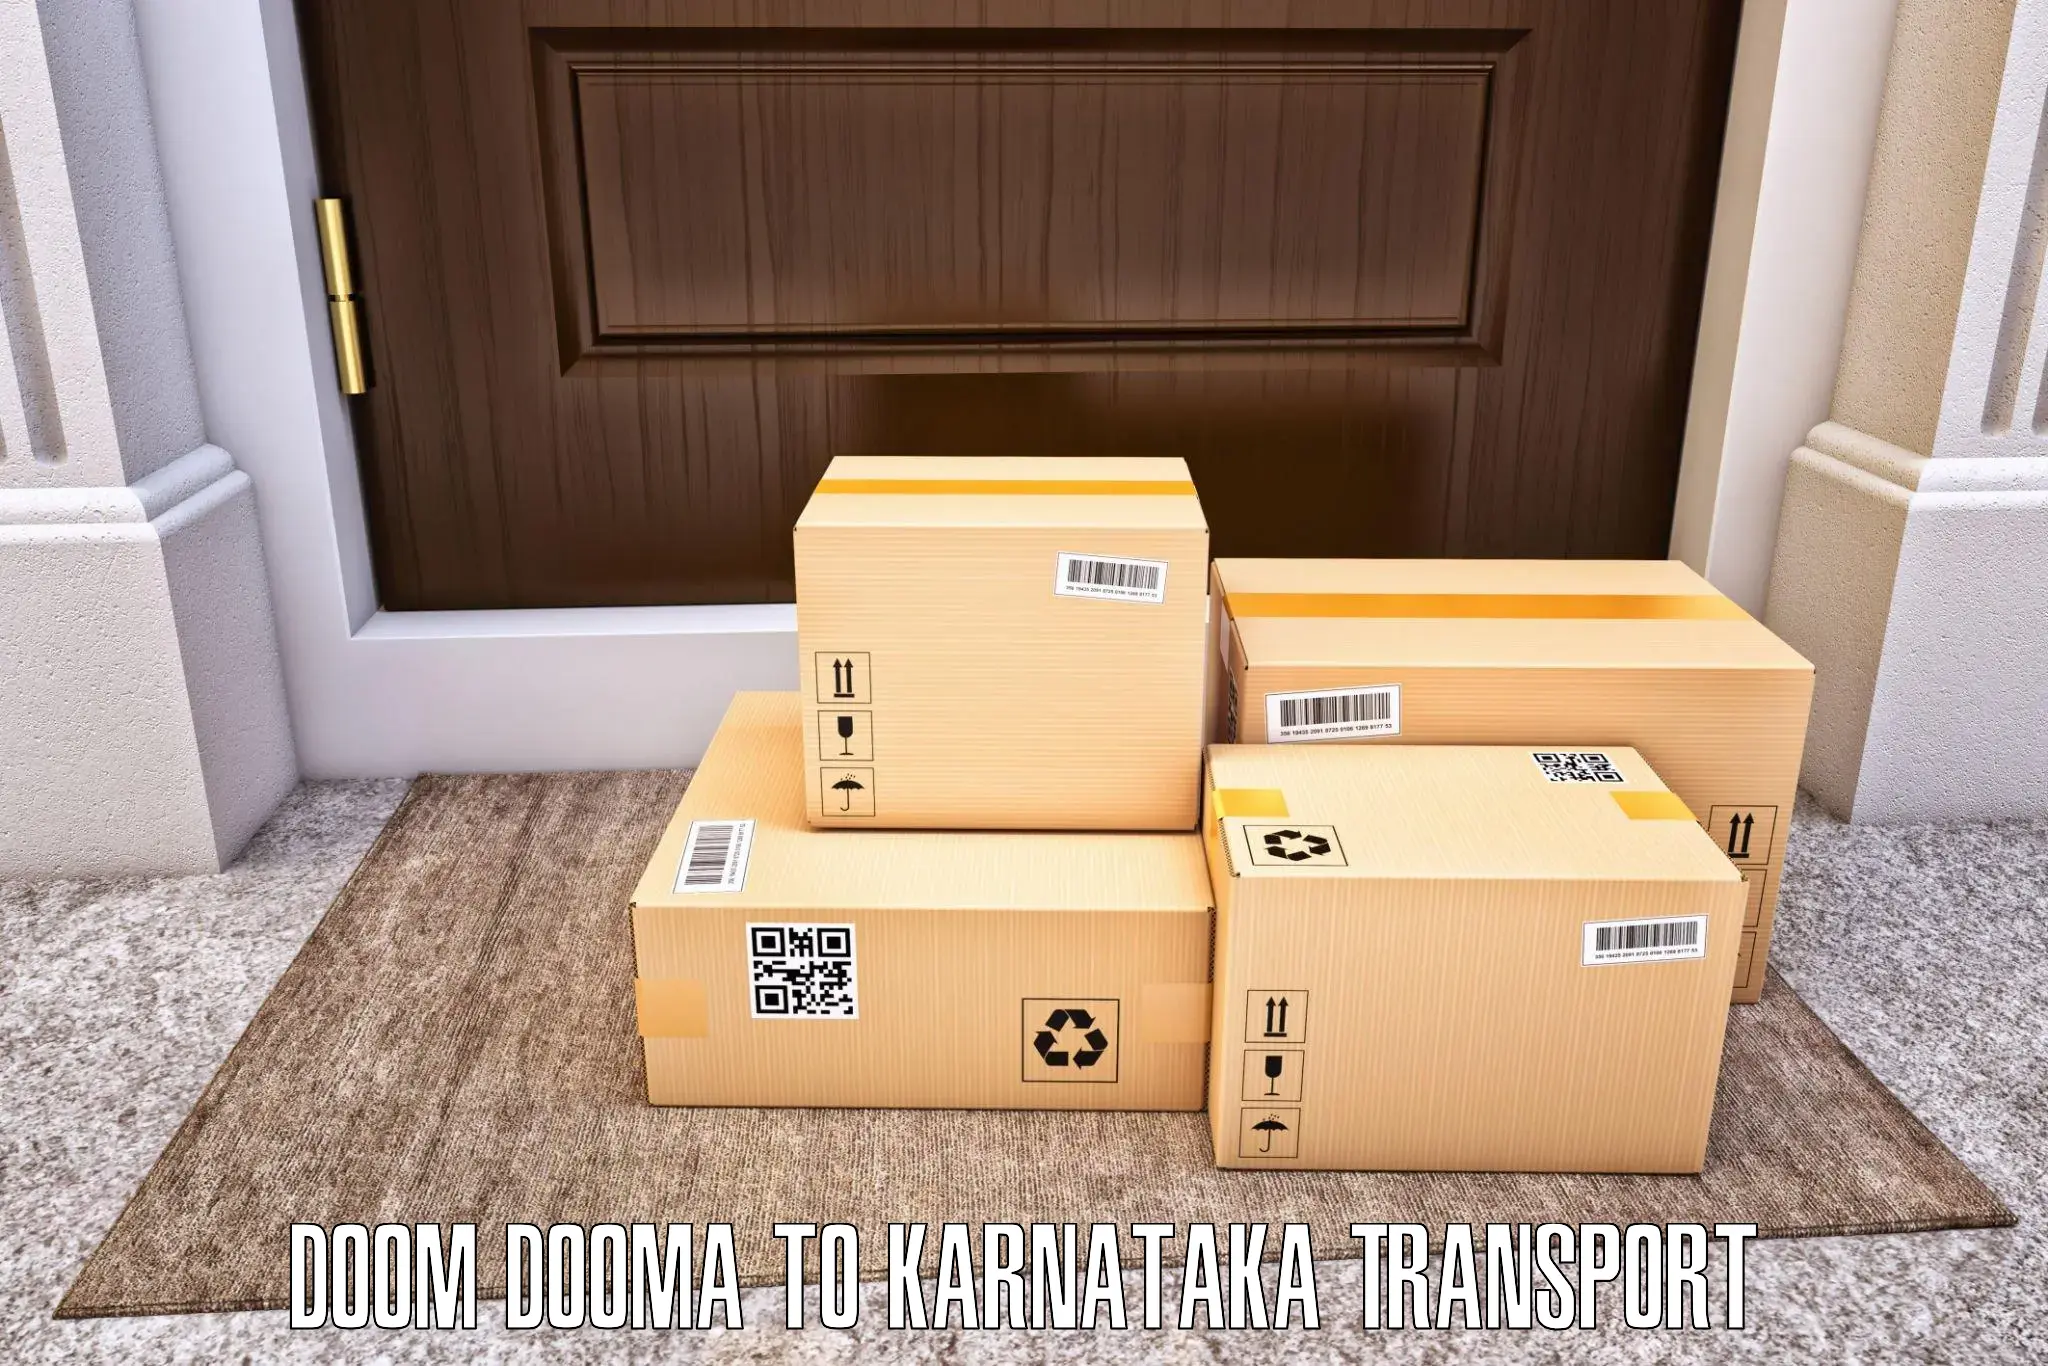 Scooty transport charges in Doom Dooma to Yaragatti